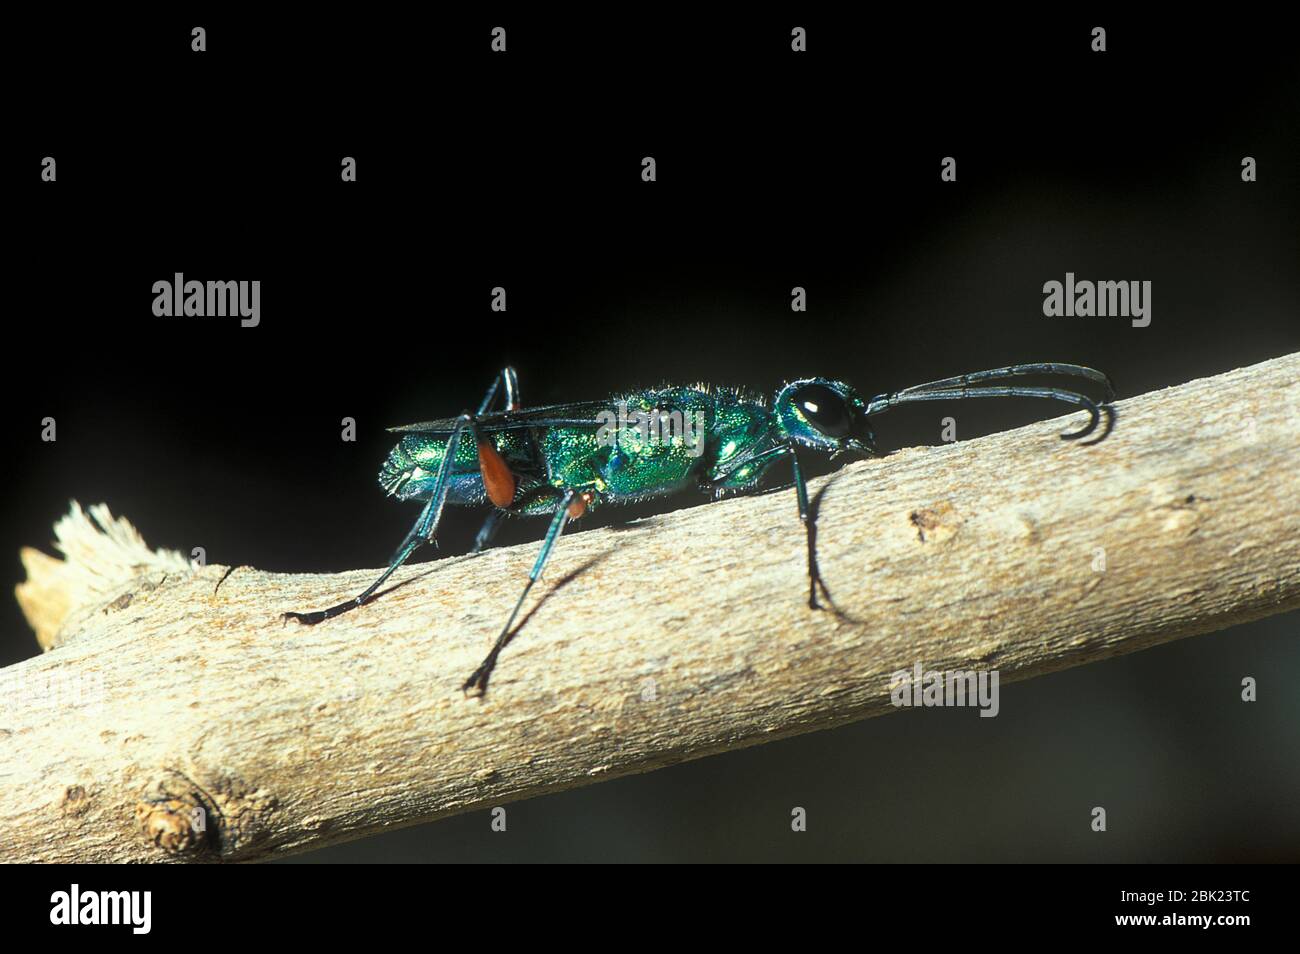 Emerald Cockroach Wasp or Jewel Wasp, Ampulex compressa, Asia, solitary, unusual reproductive behavior, involves disabling a live cockroach and using Stock Photo